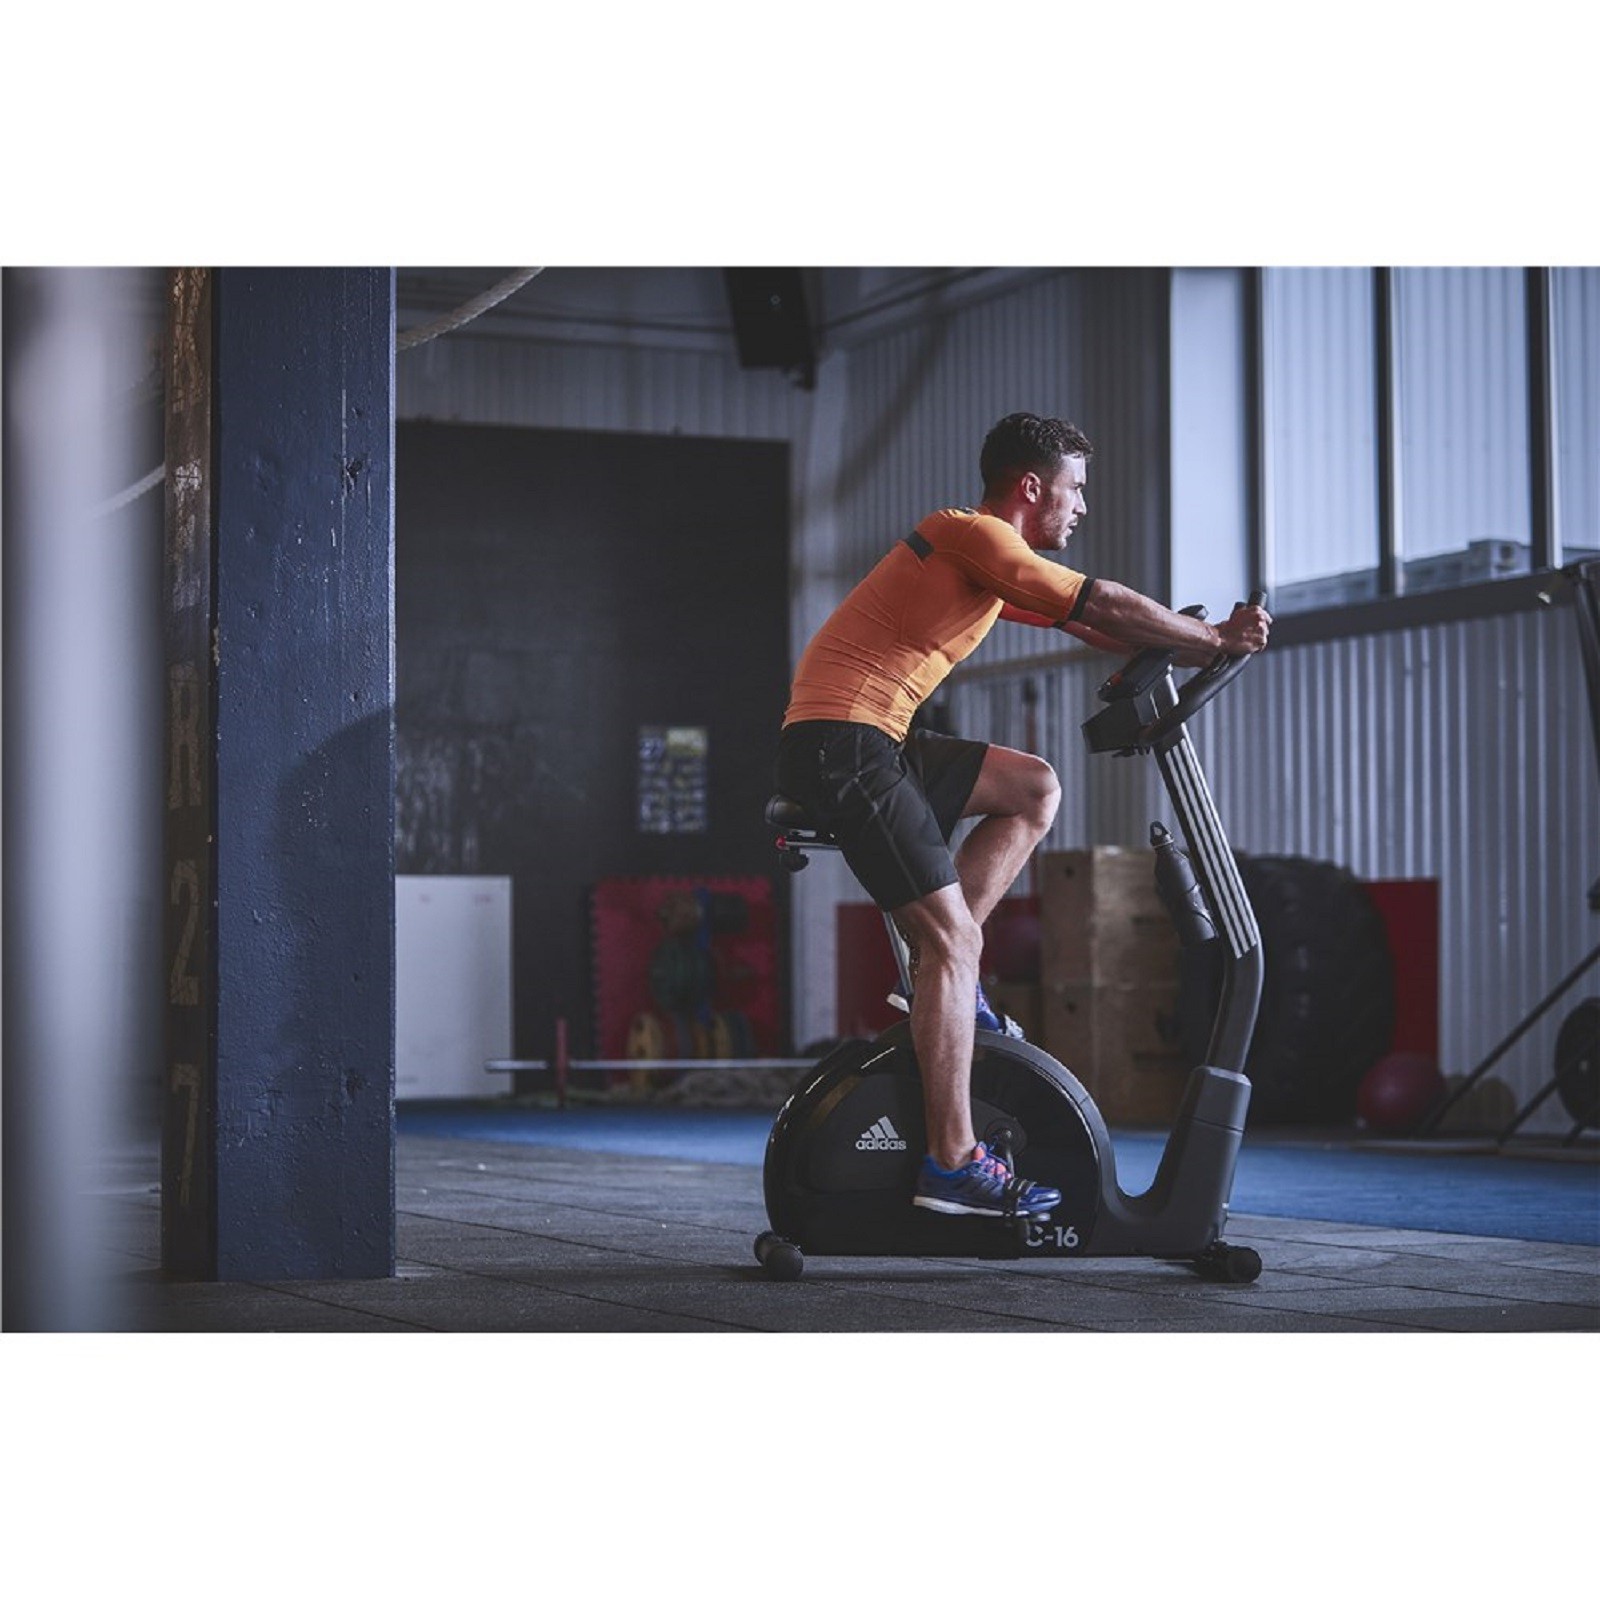 adidas c 16 exercise bike review